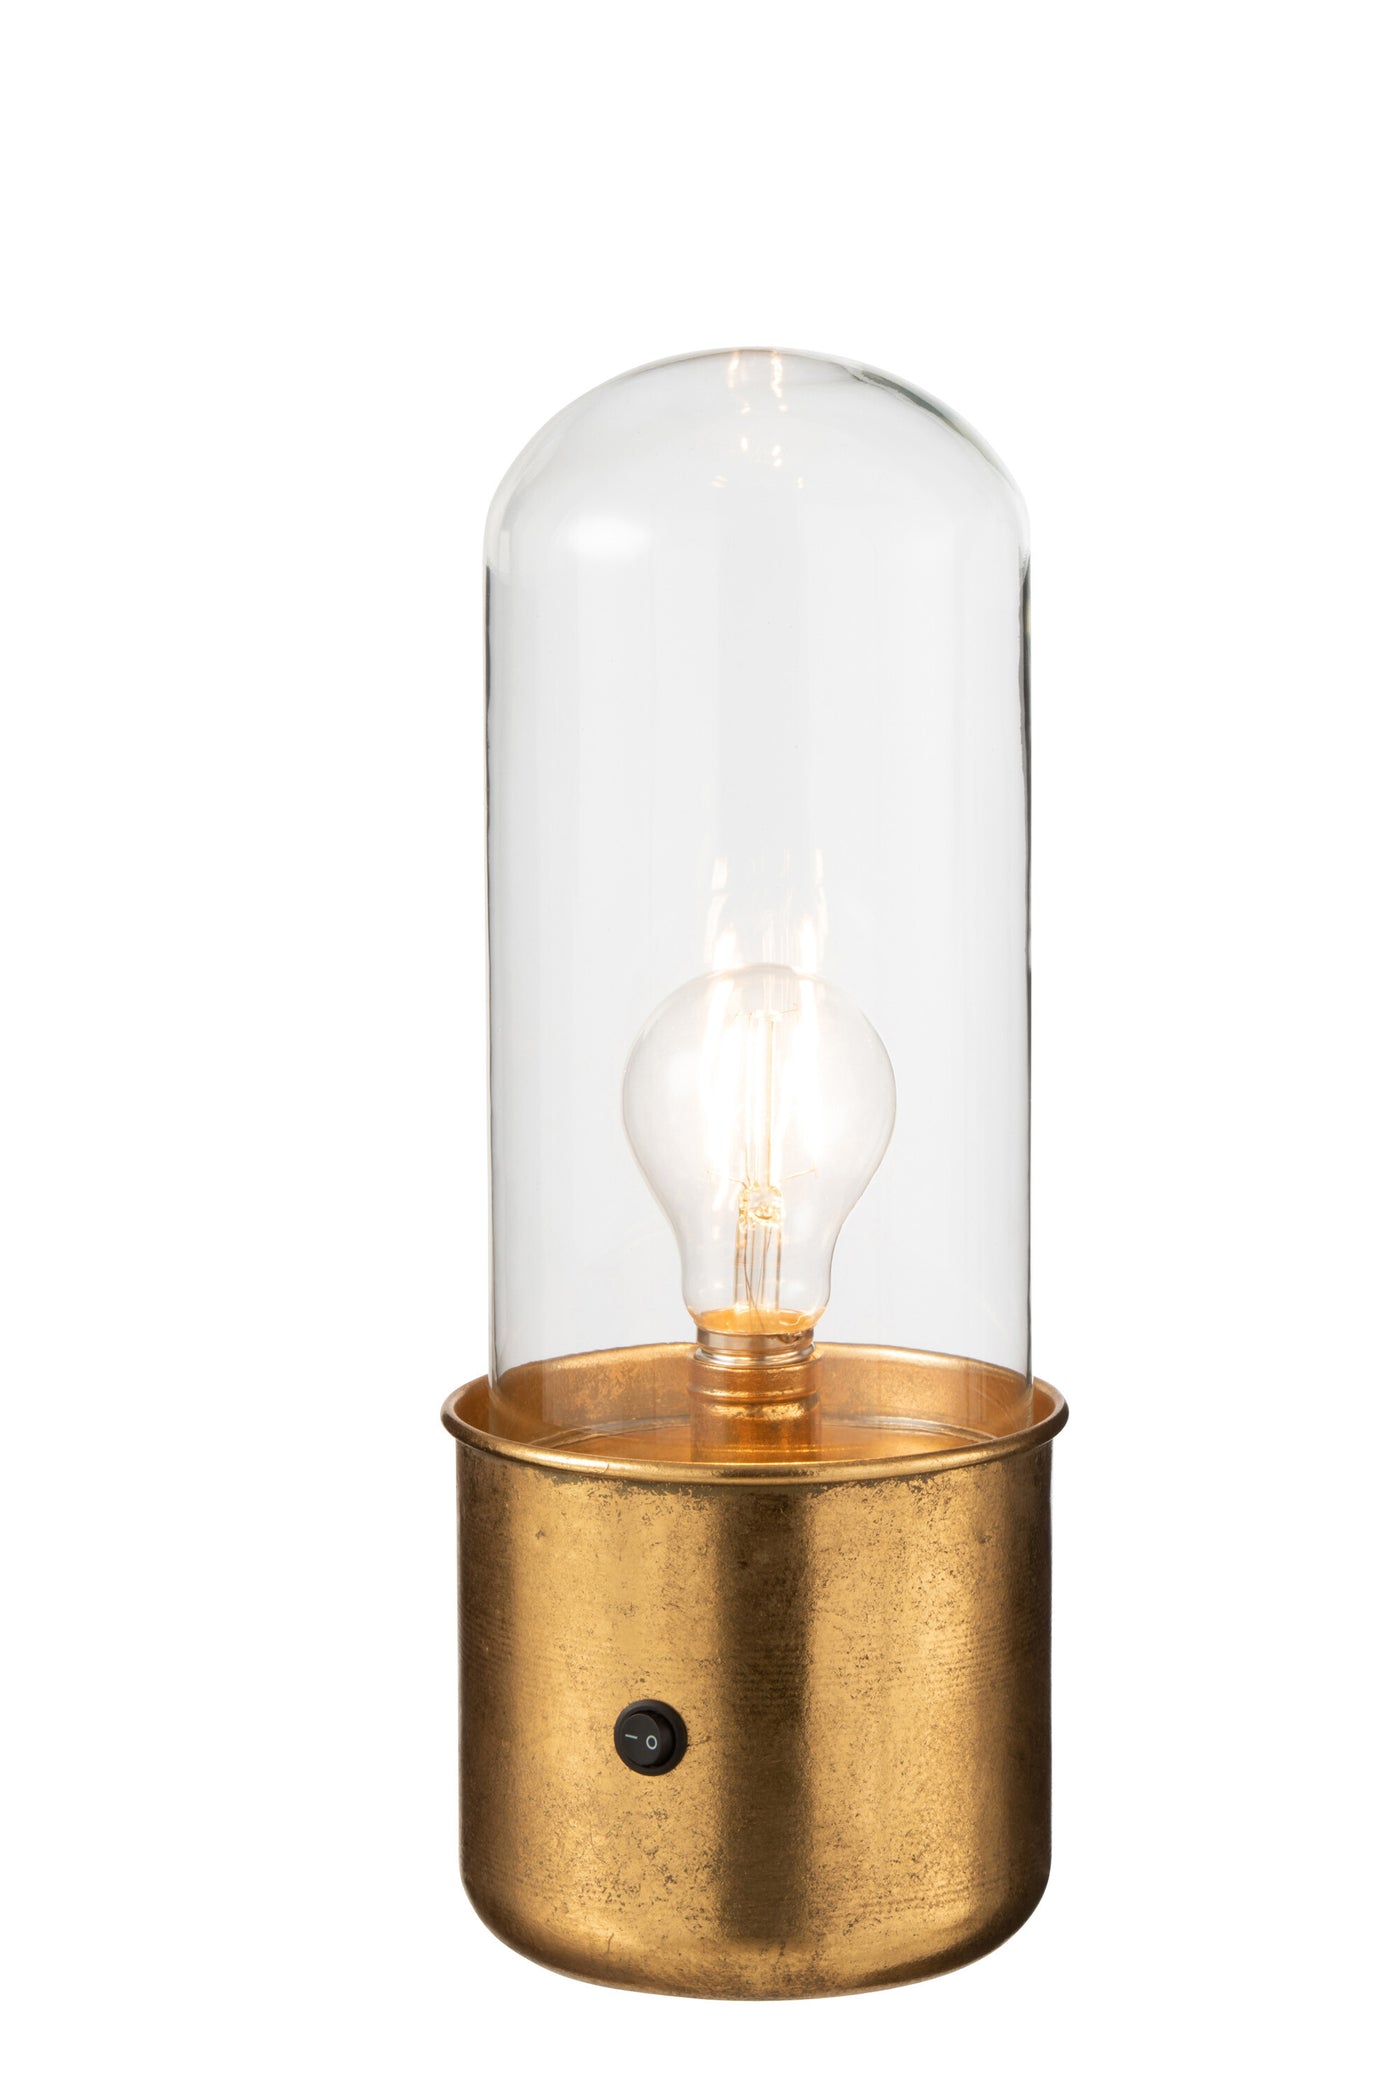 TABLE LAMP ANTIQUE LED GLASS/ZINC GOLD SMALL